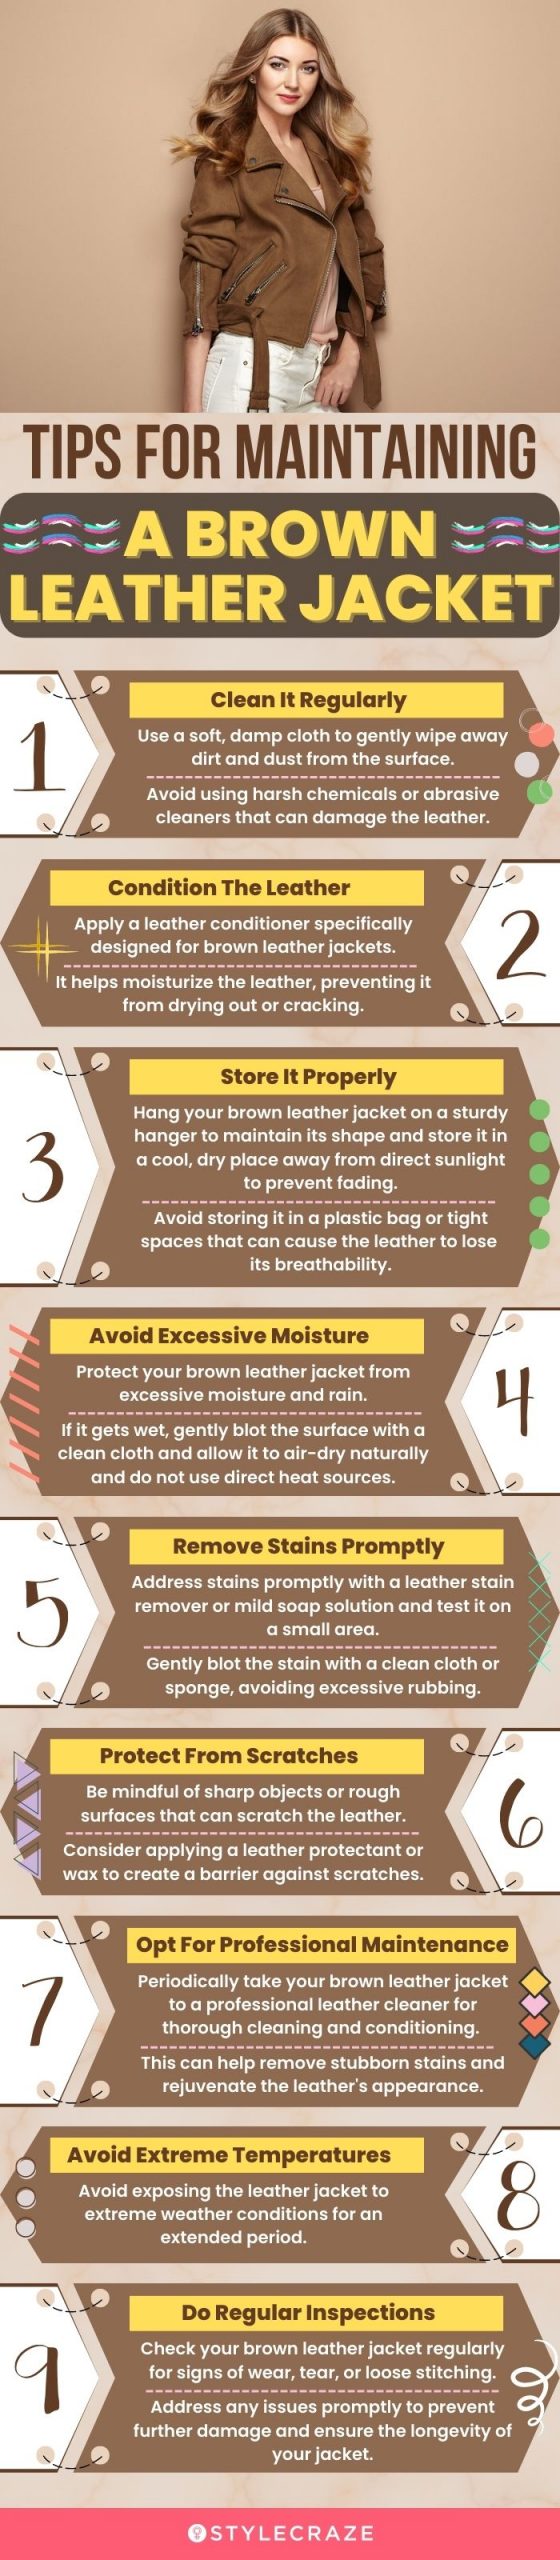 Tips For Maintaining A Brown Leather Jacket Scaled 